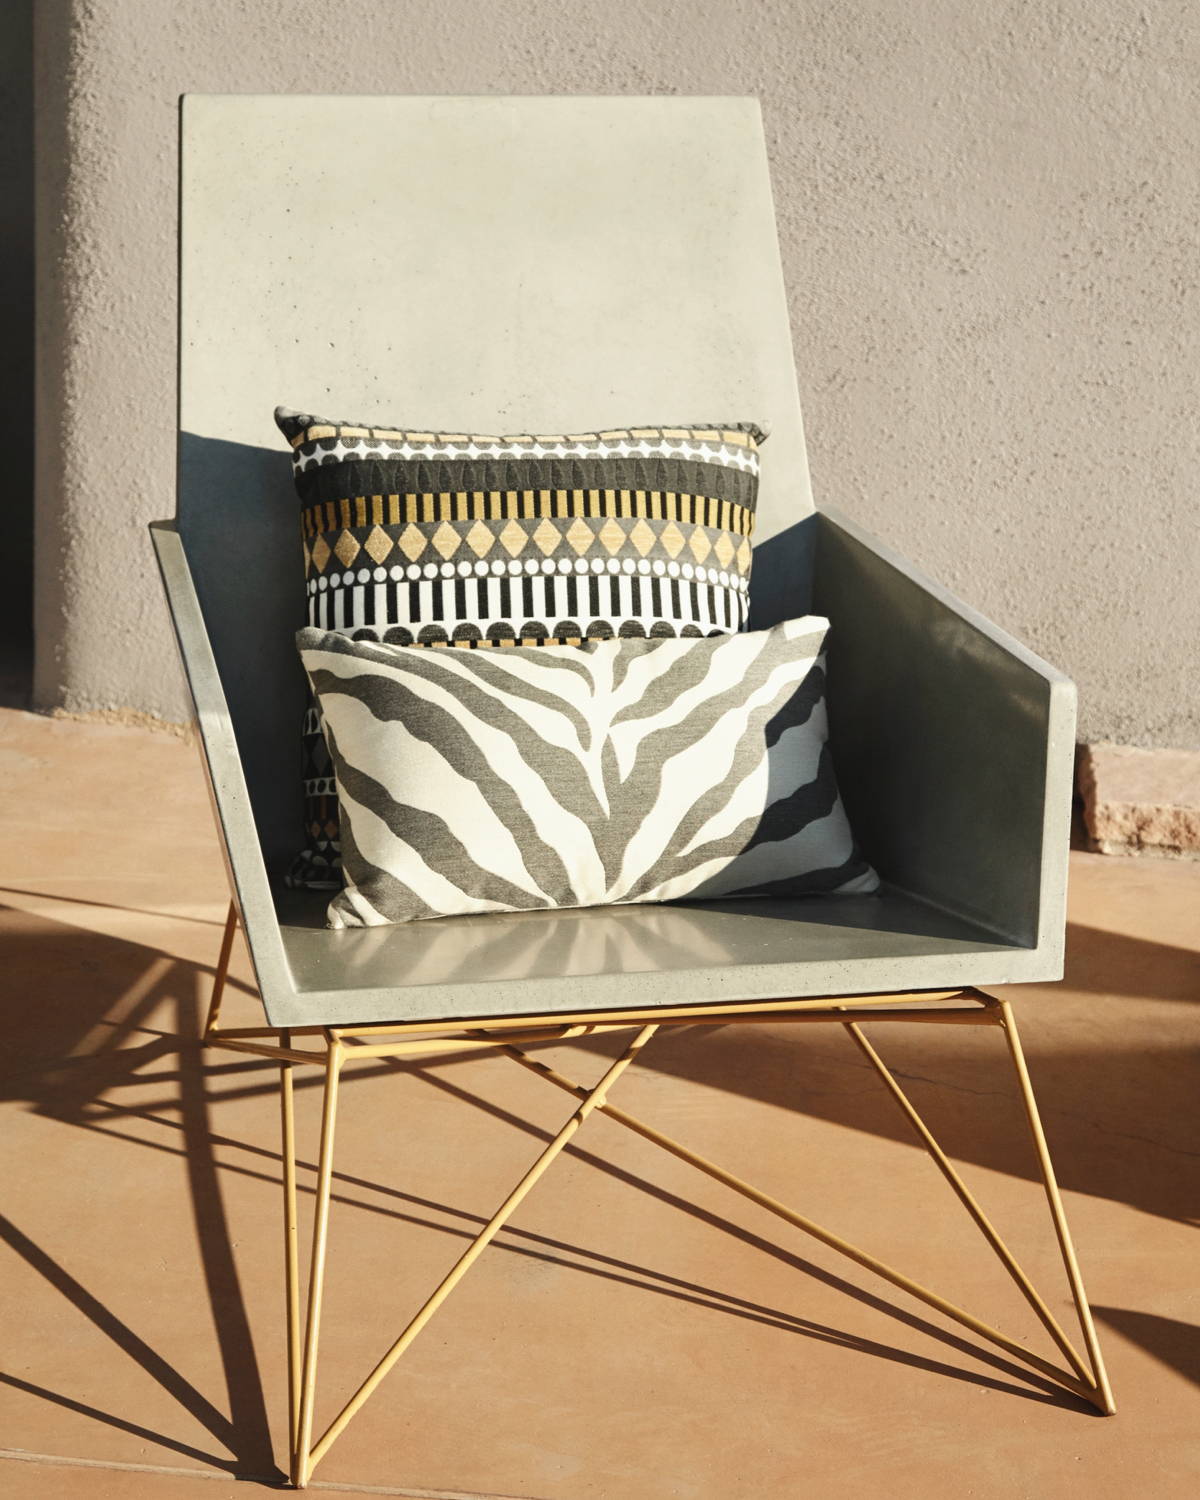 The Modern Muskoka Concrete Lounge Chair in dramatic shadow with geometric pillows.